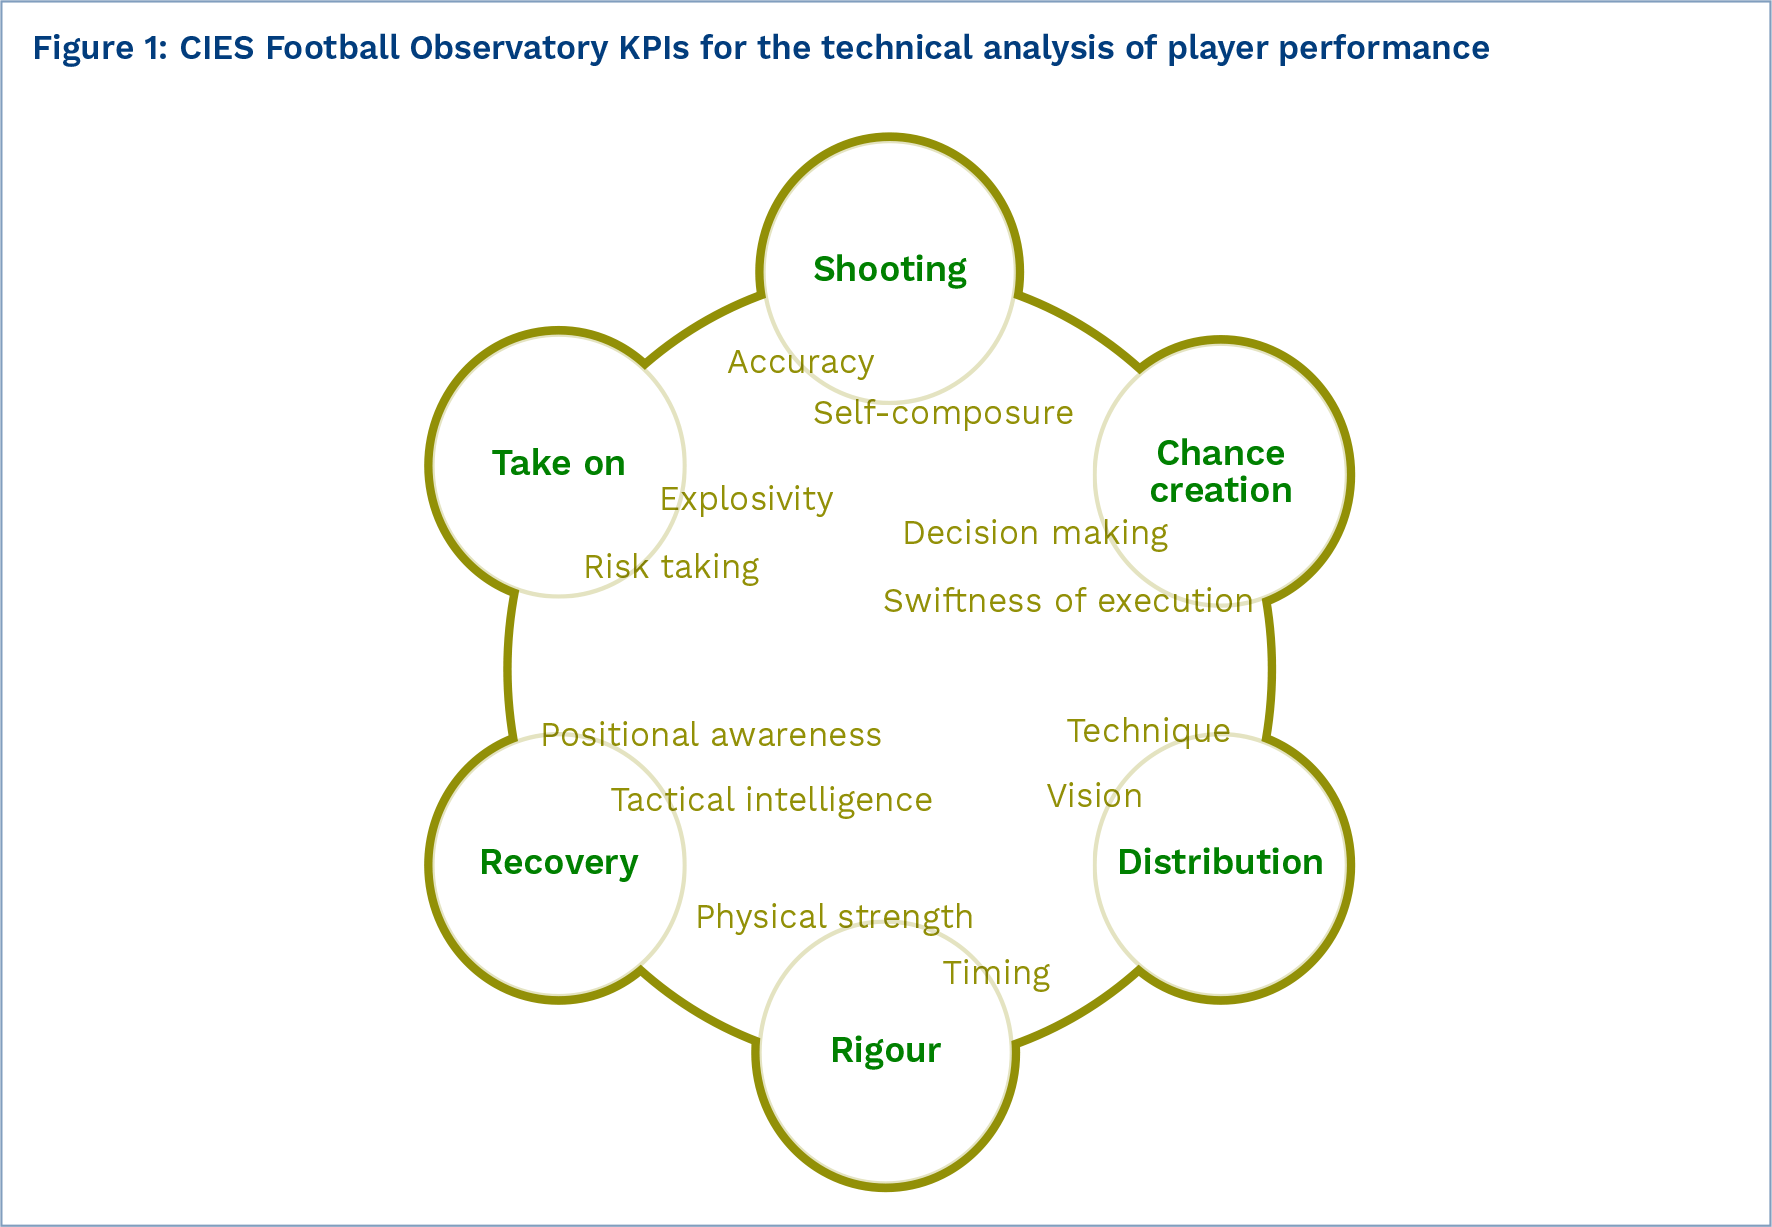 CIES Football Observatory KPIs for the technical analysis of player performance